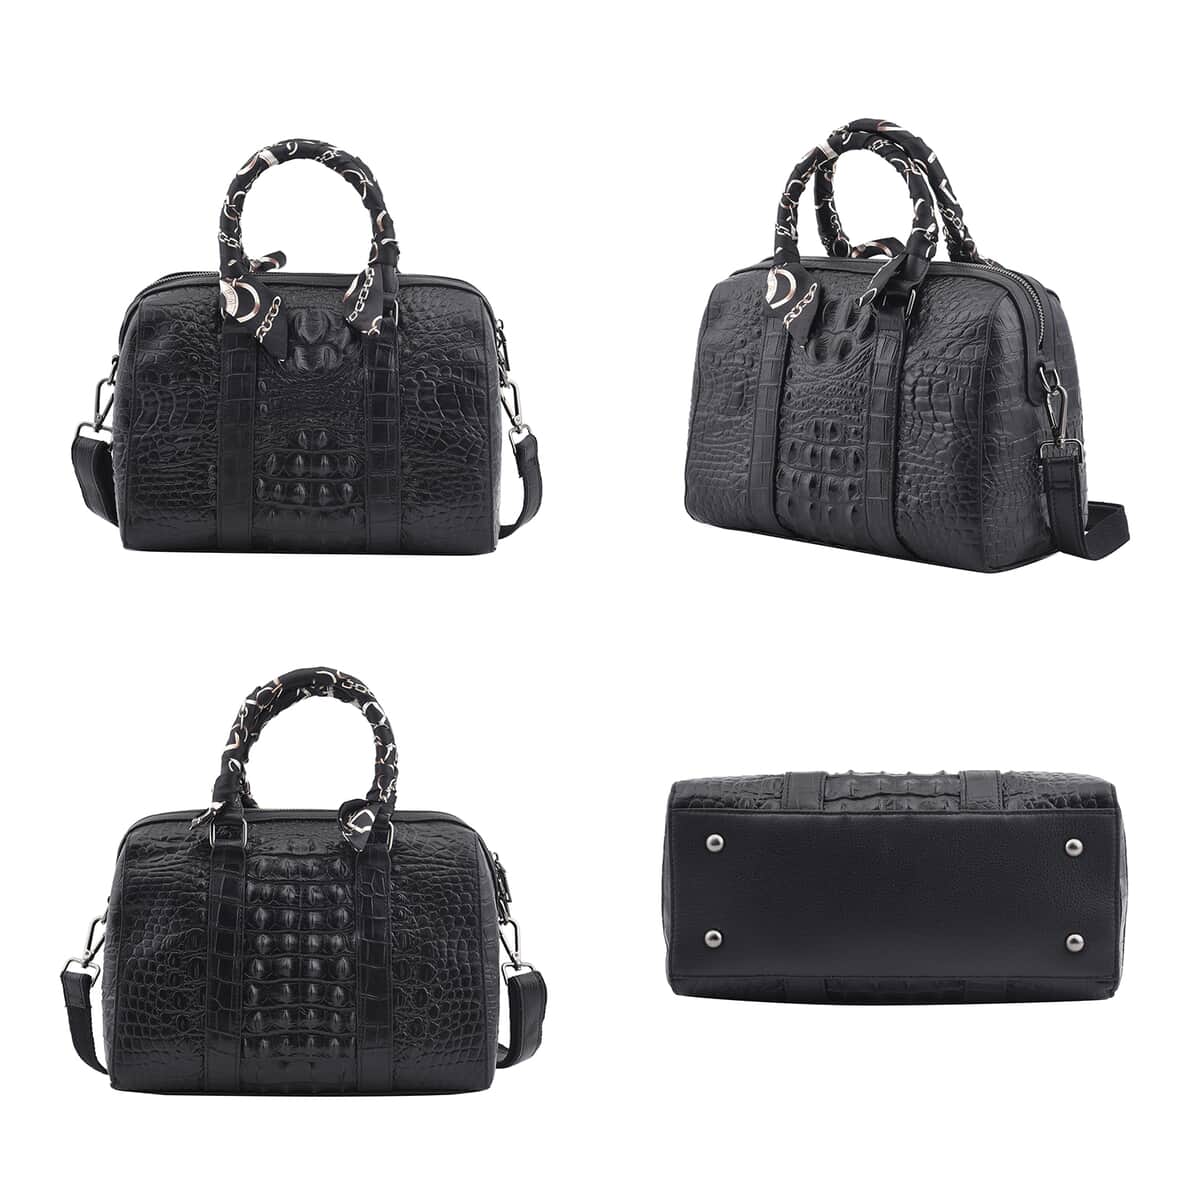 Black Crocodile Embossed Pattern Genuine Leather Convertible Bag (11"x5"x9") with Handle Drop and Shoulder Strap image number 1